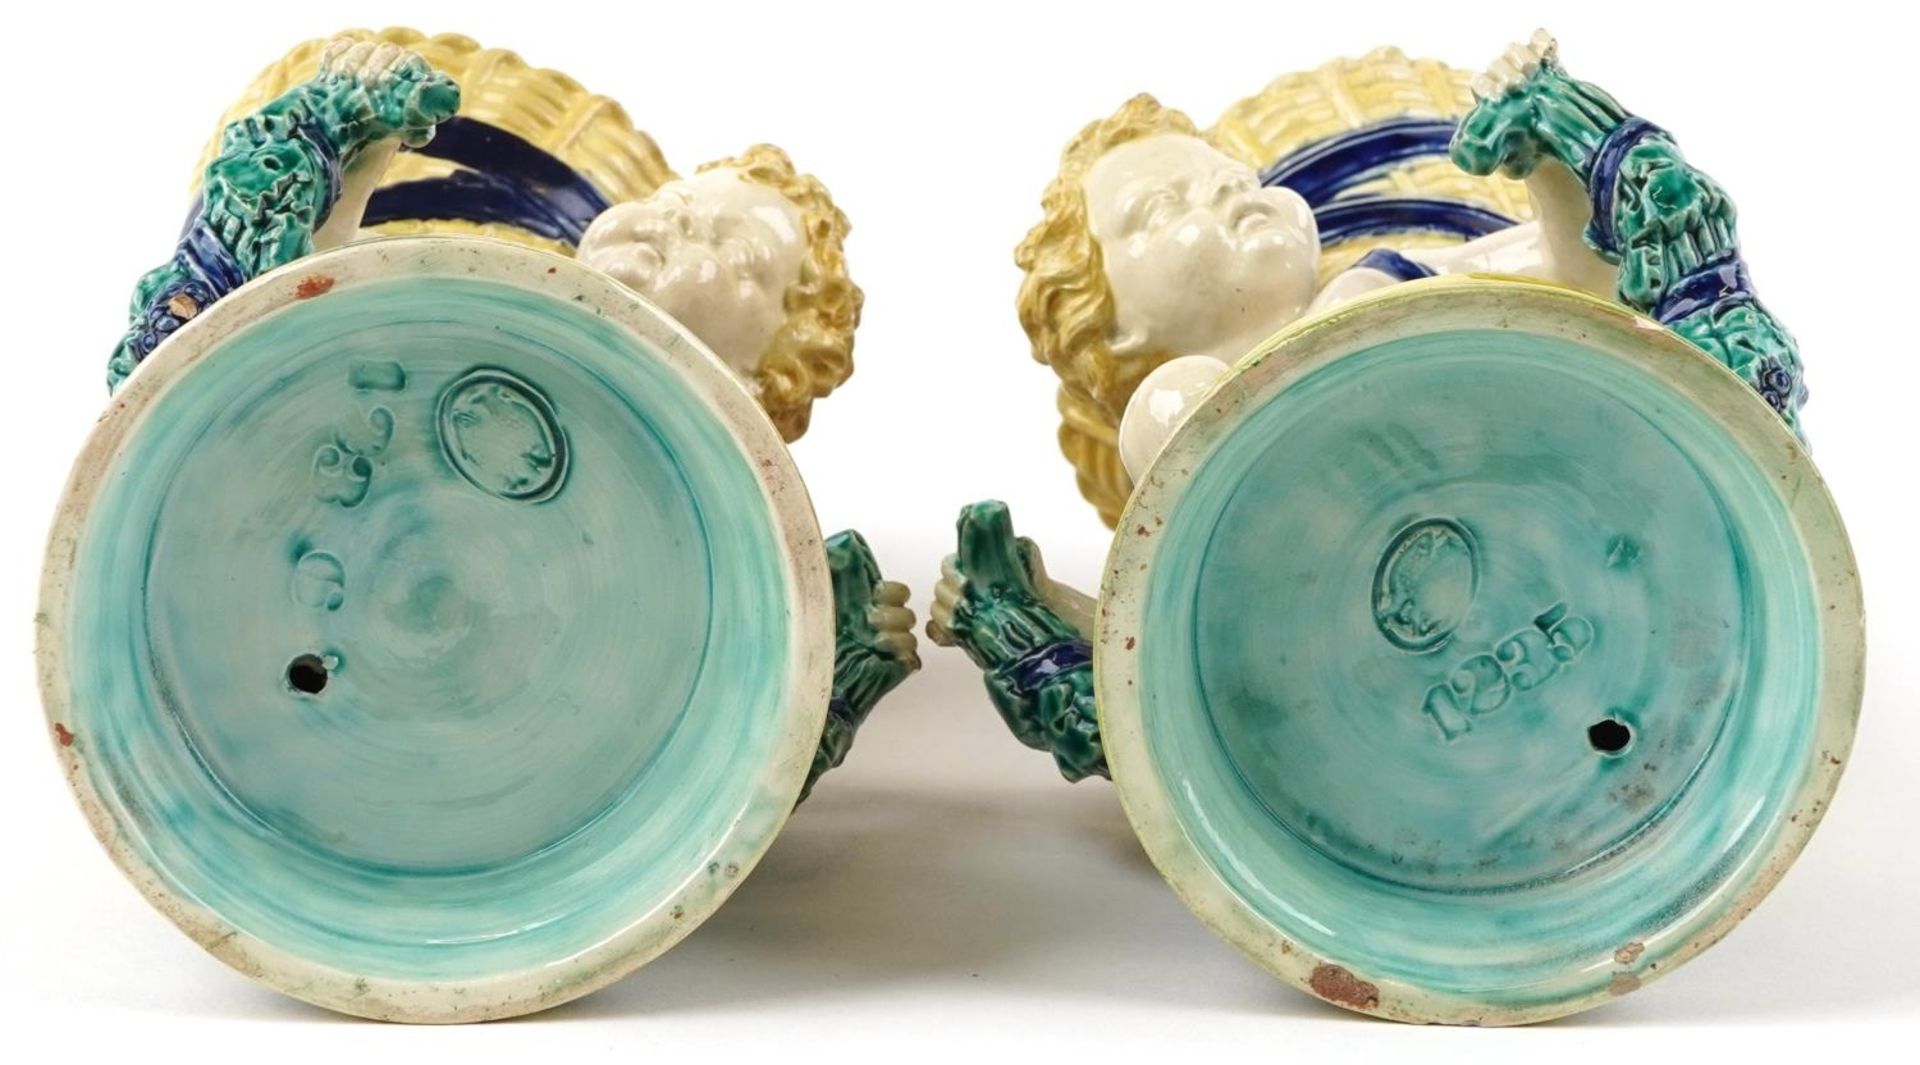 Pair of 19th century European Maiolica vases in the form of Putti carrying cornucopia, each with - Image 3 of 4